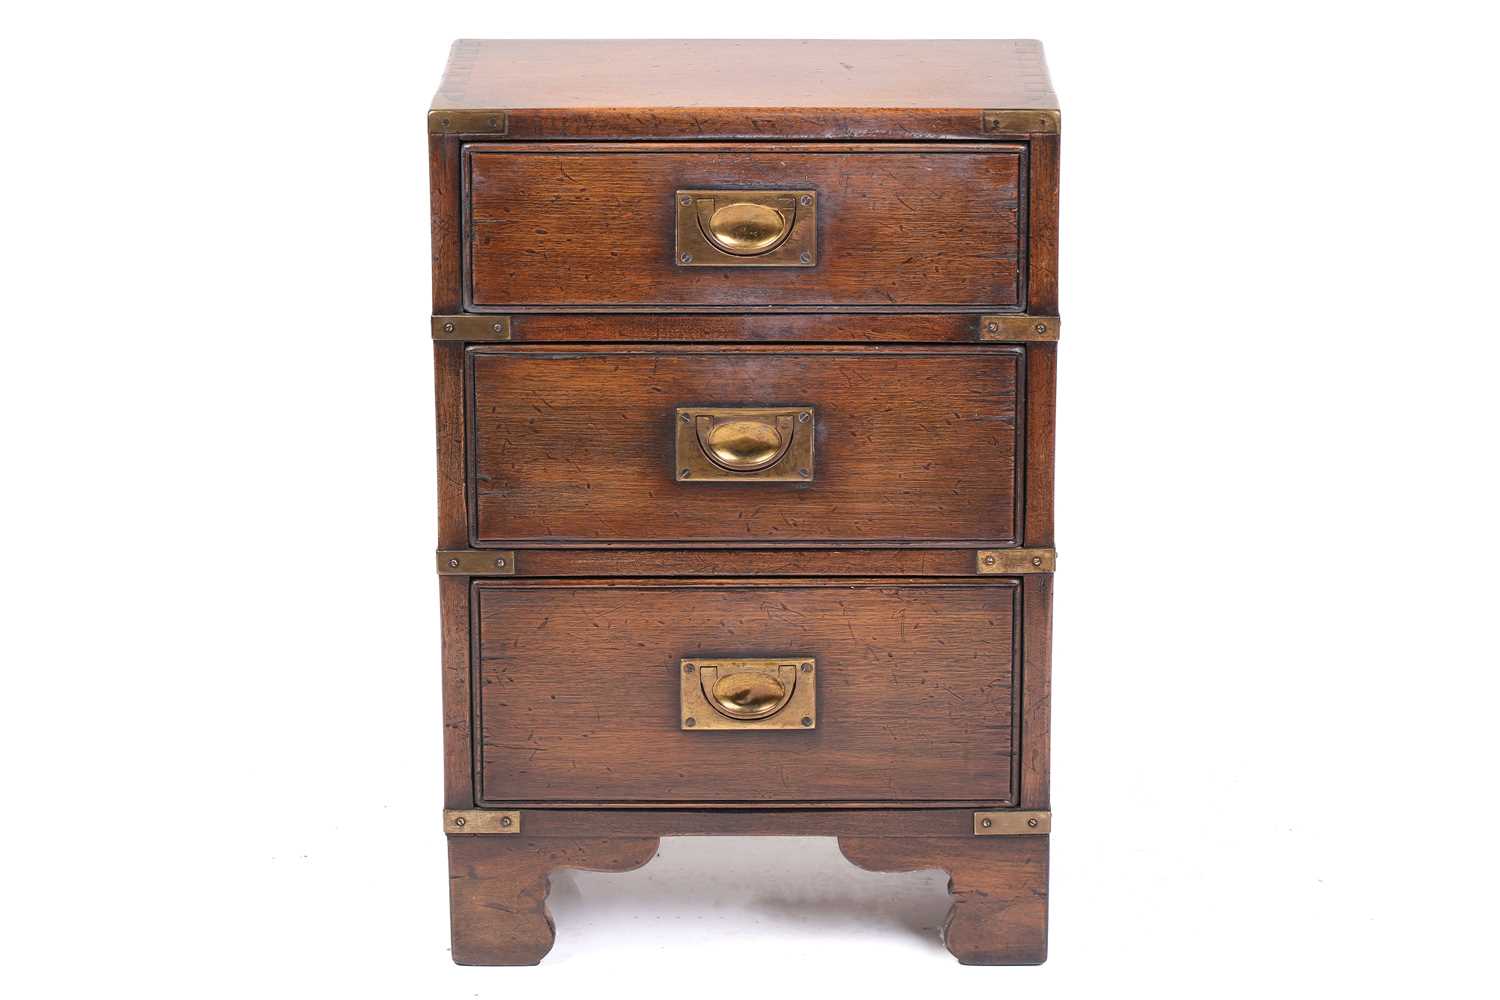 A small brass-bound mahogany campaign style three-drawer pedestal chest of drawers, 20th century,